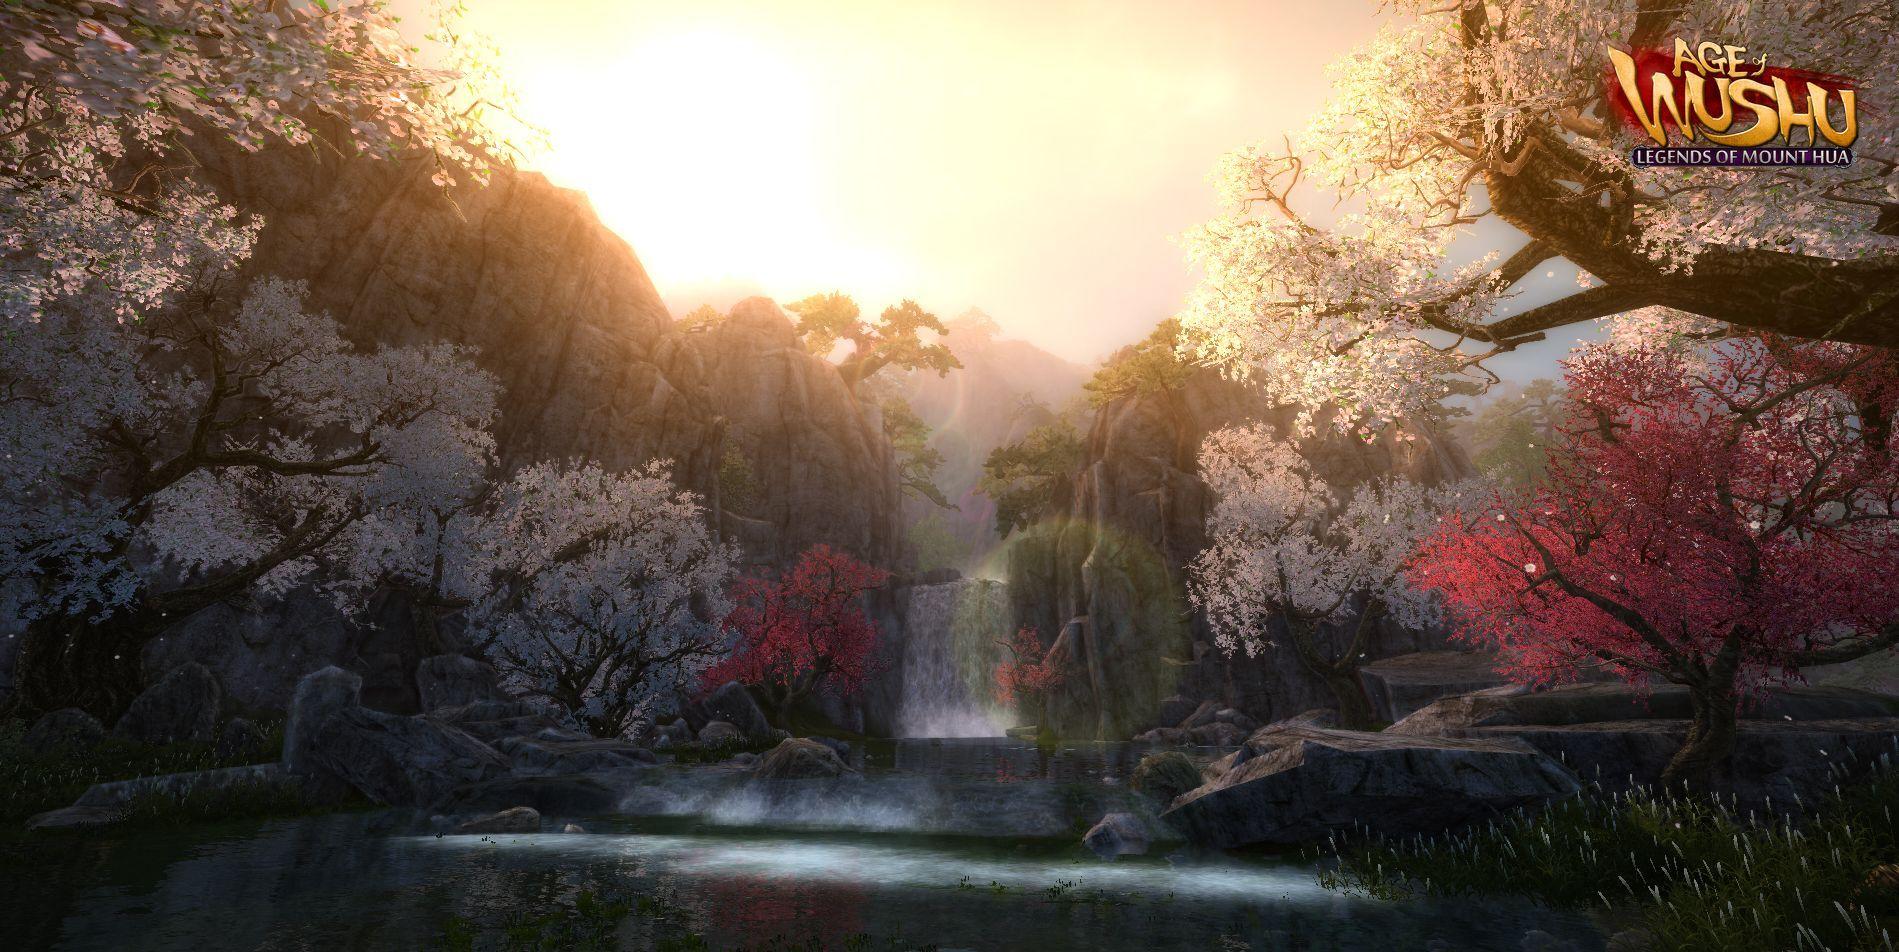 Age of Wushu Legends of Mount Hua Review: A New Domain